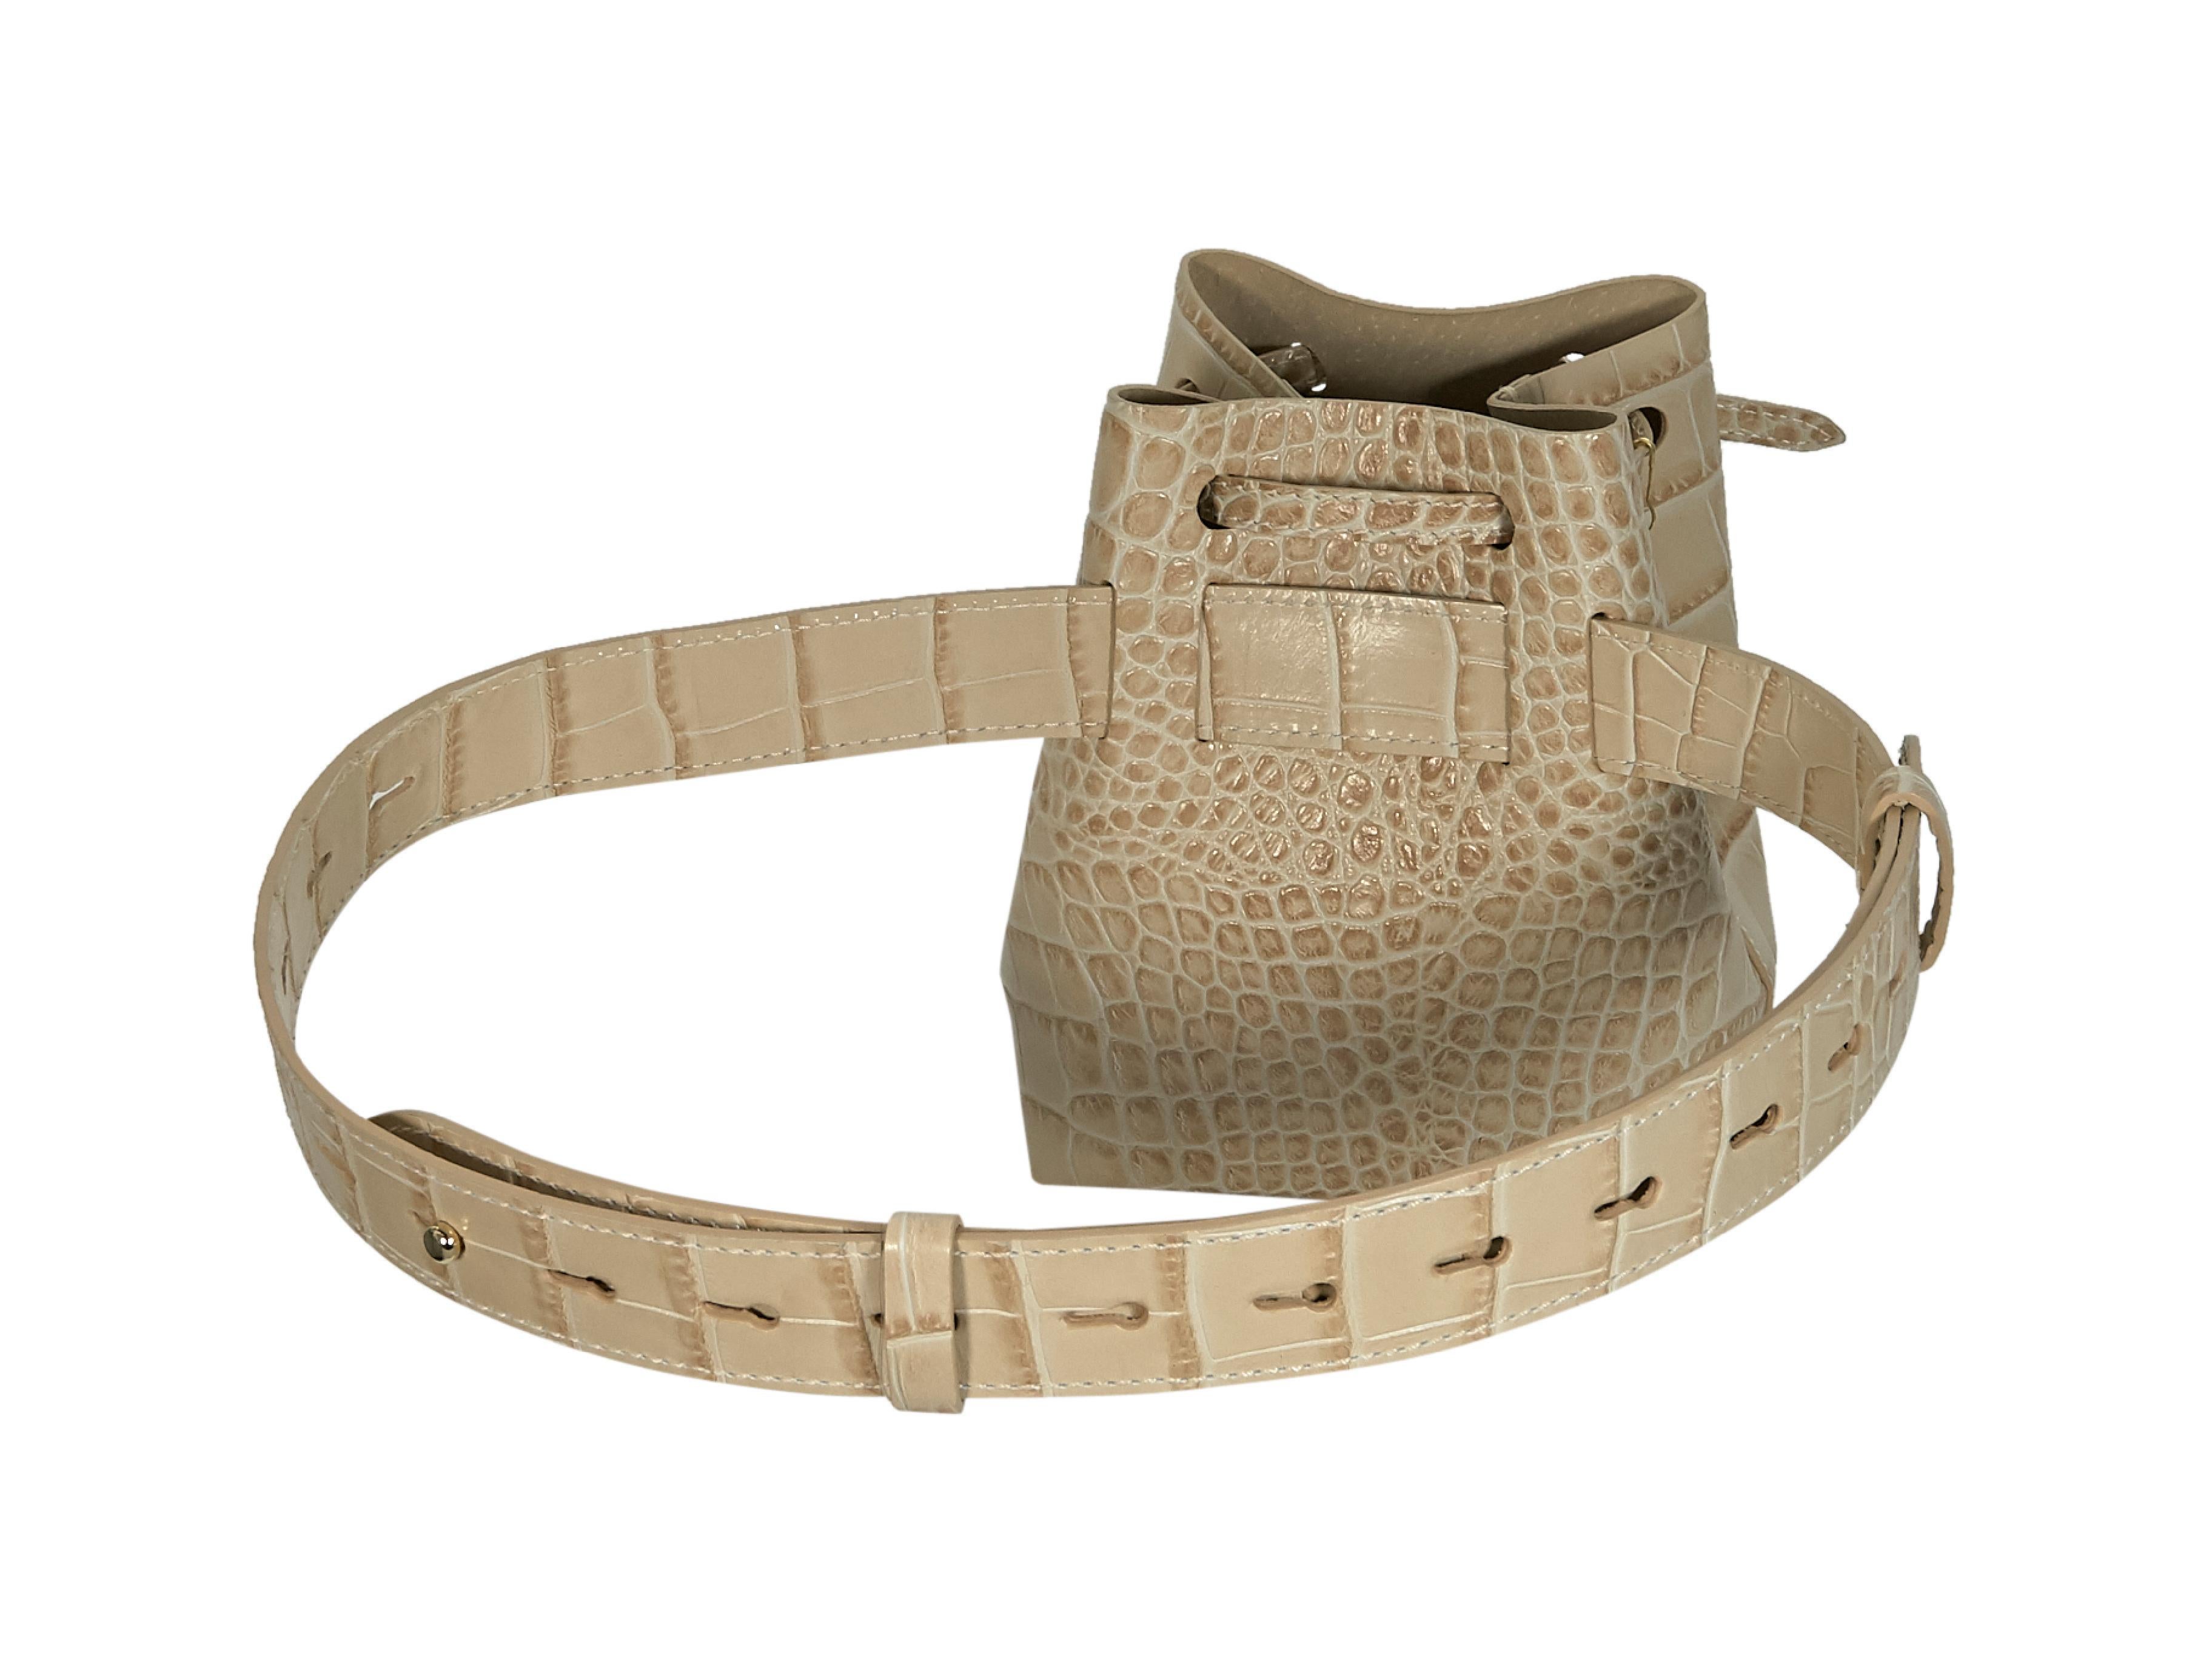 Product details:  Beige croc-embossed vegan leather Minee belt bag by Nanushka.  From the FW18 collection.  Drawstring top closure.  Adjustable waistband.  Goldtone hardware.  6.5